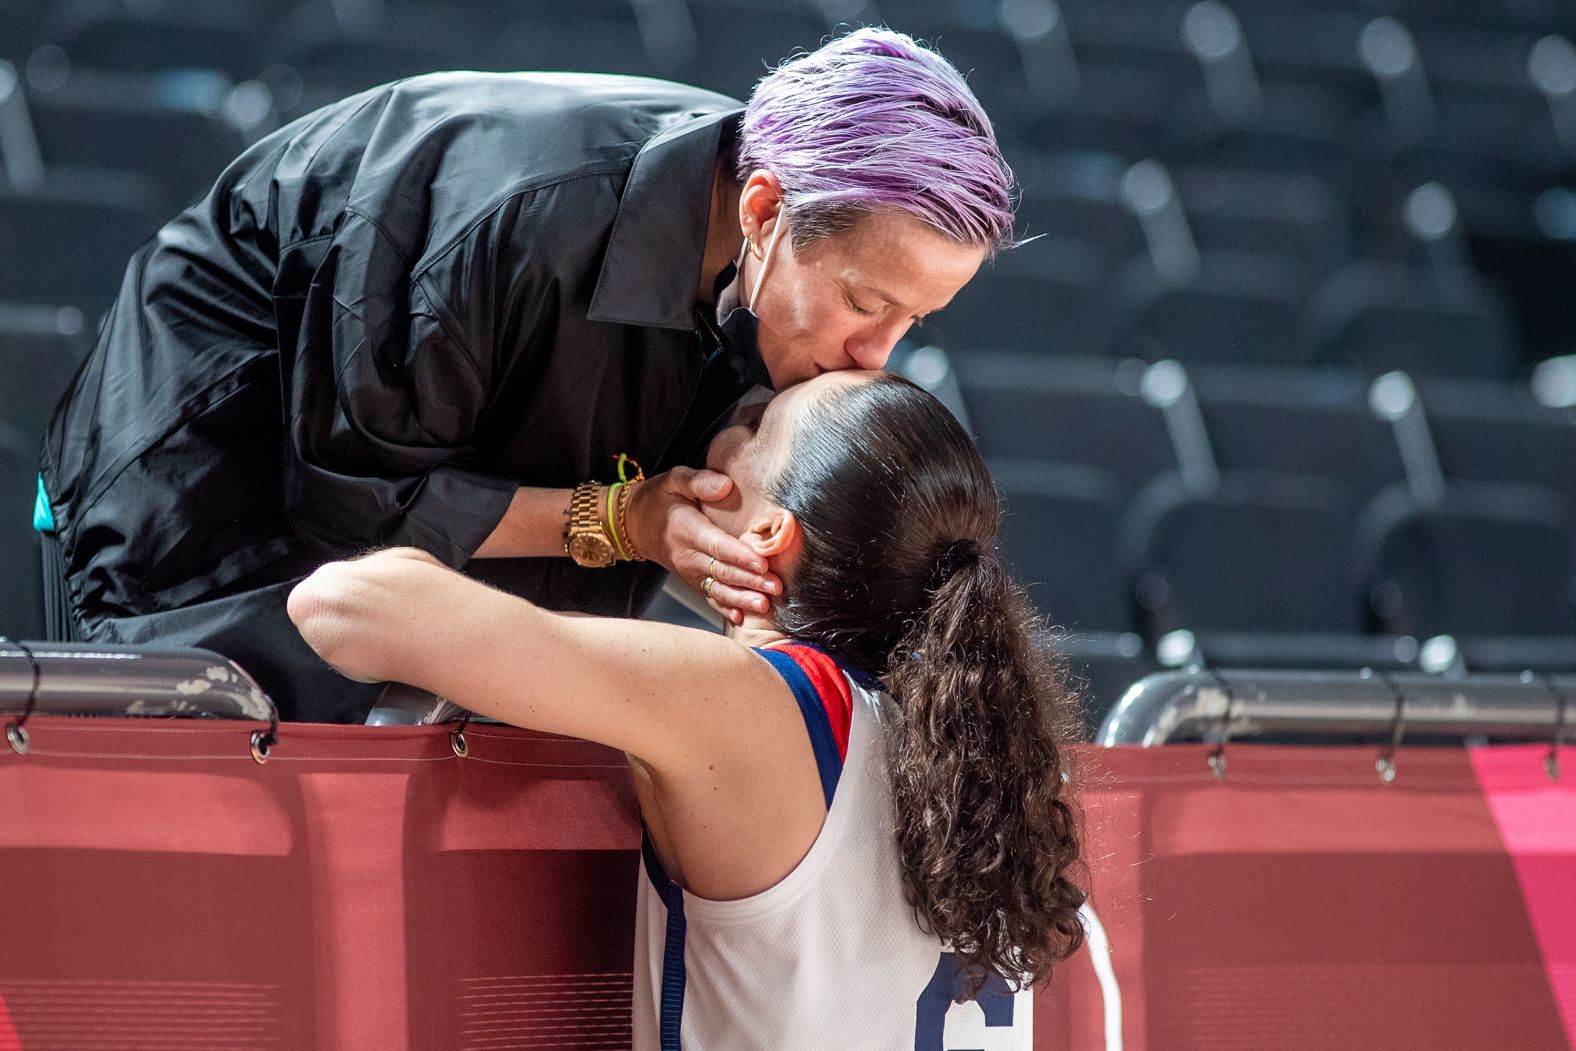 Rapinoe kisses her fiancée, American basketball player Sue Bird, after the United States defeated Japan in the women's basketball gold medal game at the Tokyo Olympics in August 2021. Rapinoe and Bird met at the 2016 Olympics and were engaged in 2020.